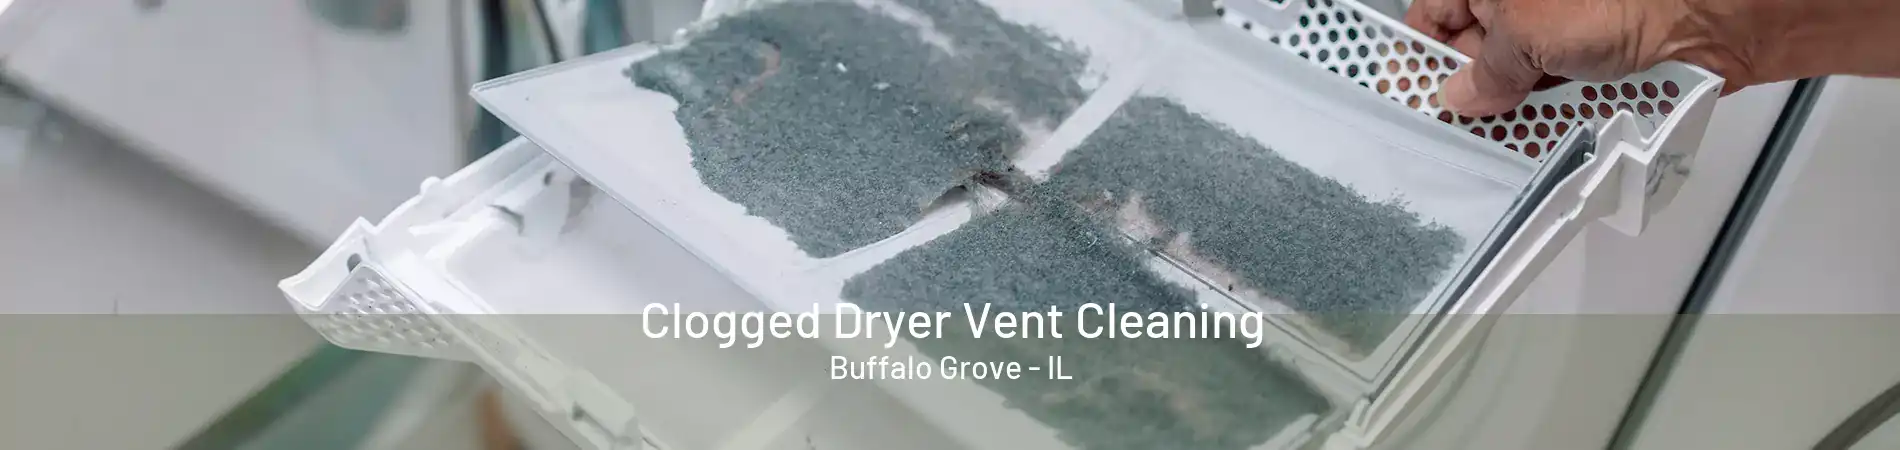 Clogged Dryer Vent Cleaning Buffalo Grove - IL